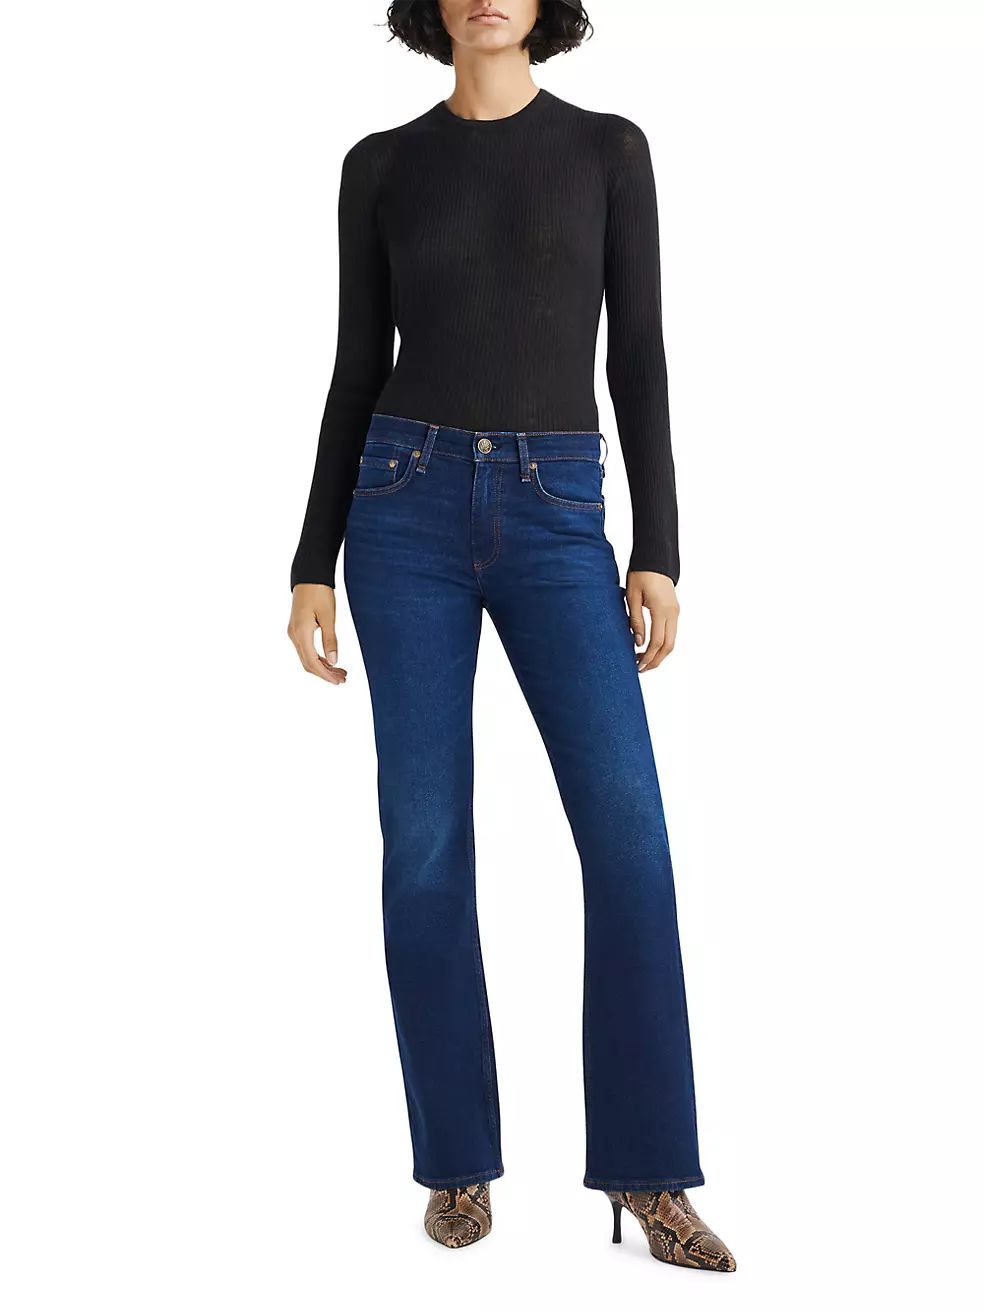 Peyton Mid-Rise Boot-Cut Jeans | Saks Fifth Avenue